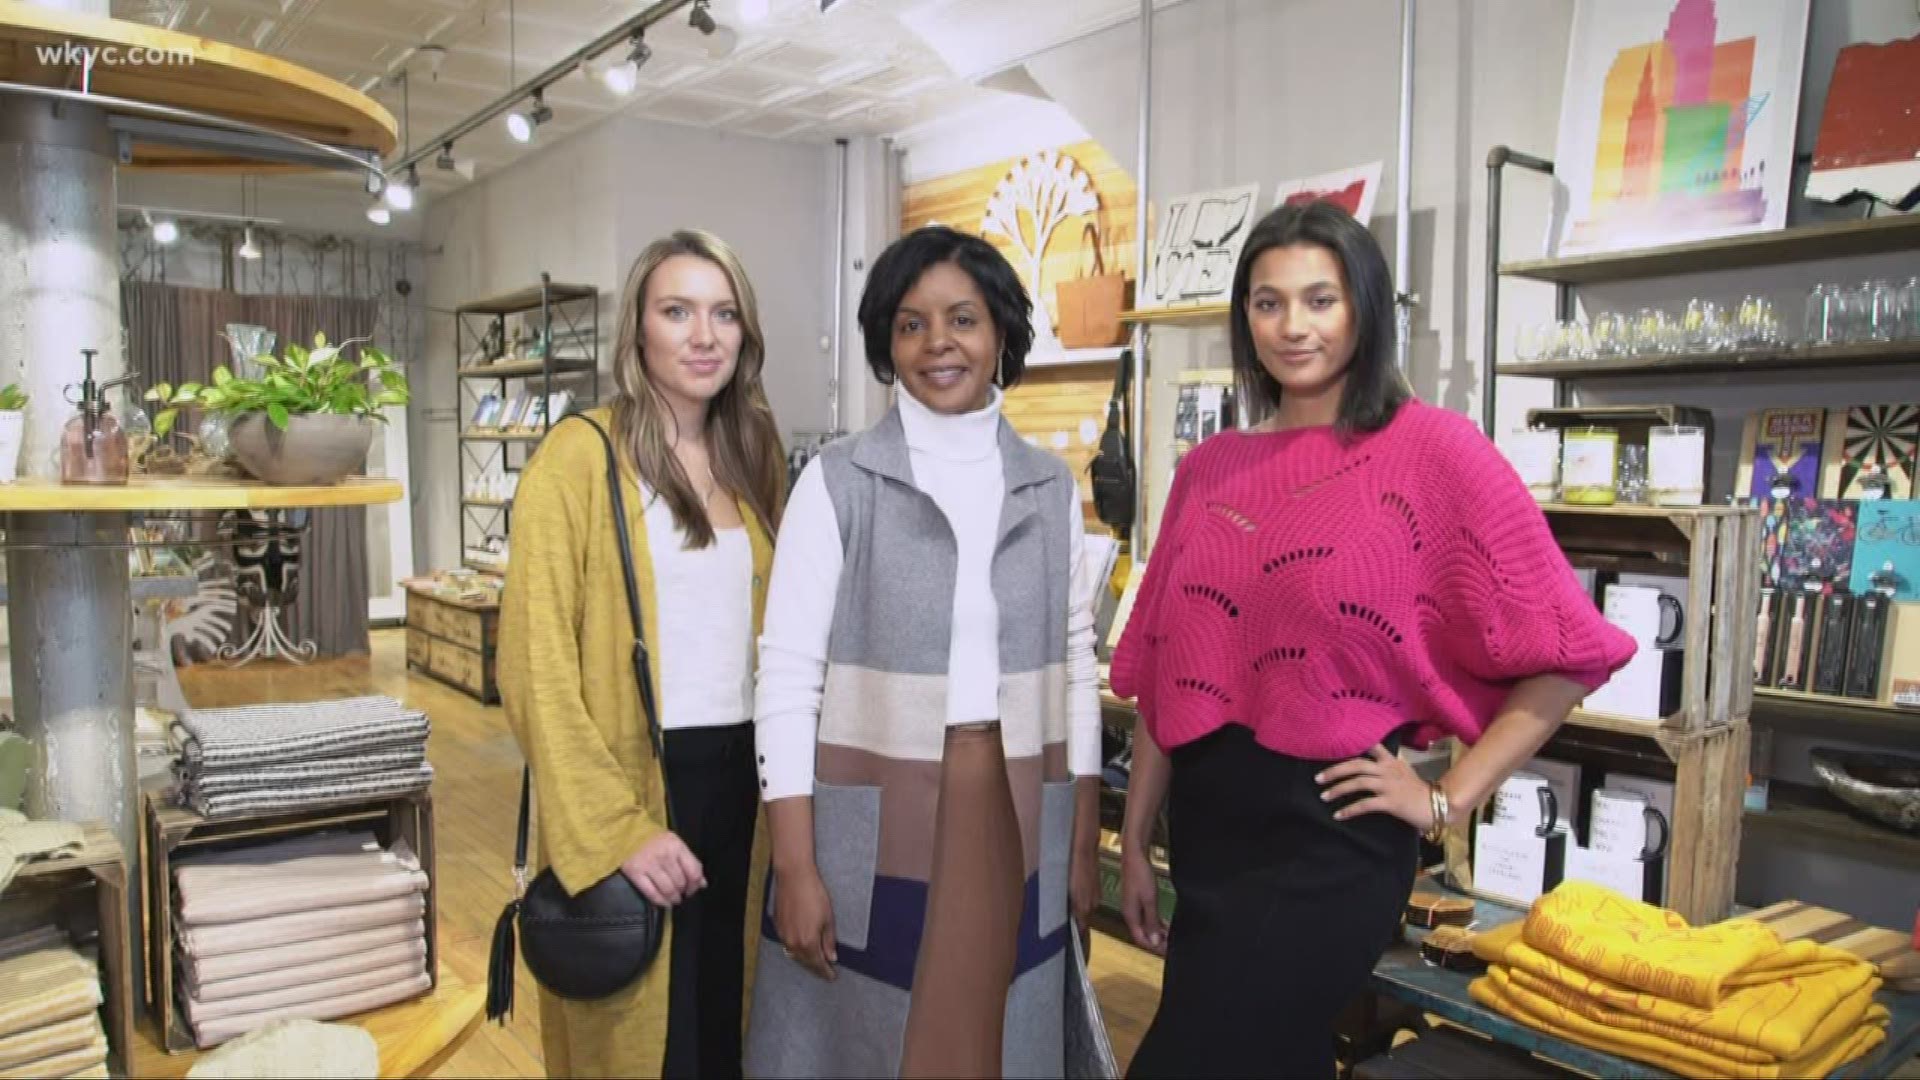 Sara Shookman and Wardrobe Stylist Jasmine Woolfork show us how to look chic and cozy as the temperatures drop. You don't have to sacrifice style for comfort!